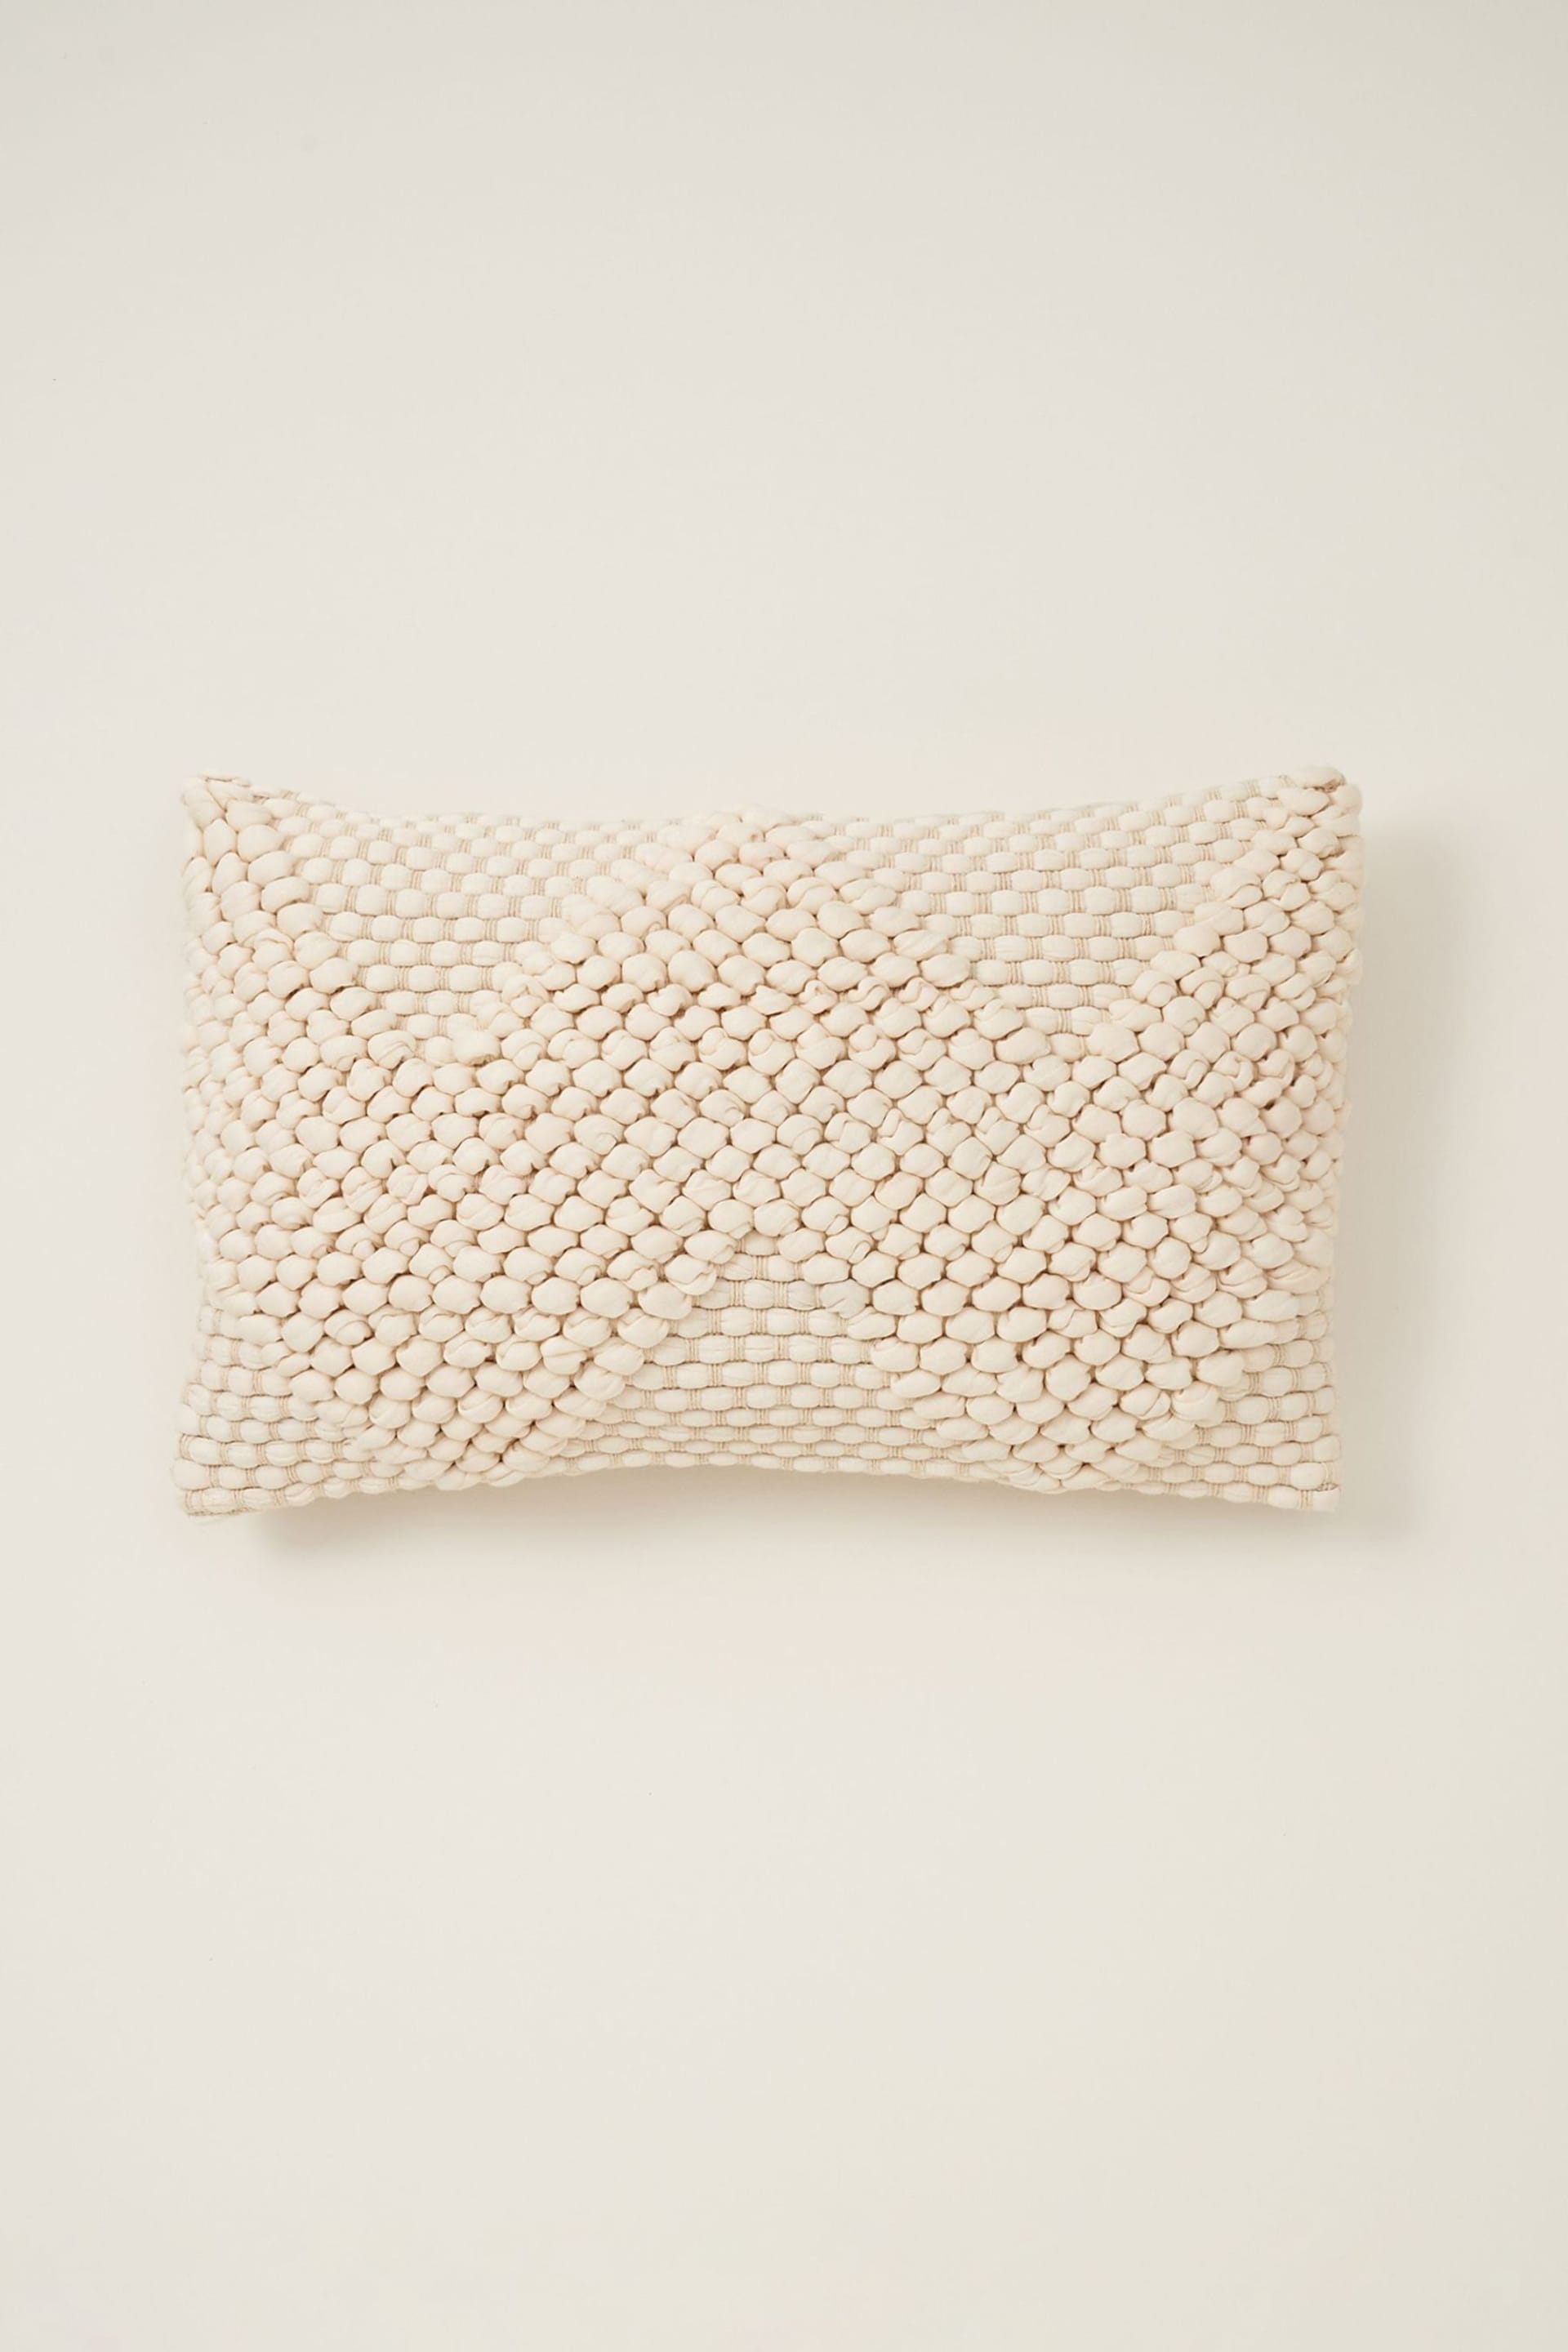 Truly Cream Knotted Cushion - Image 2 of 3